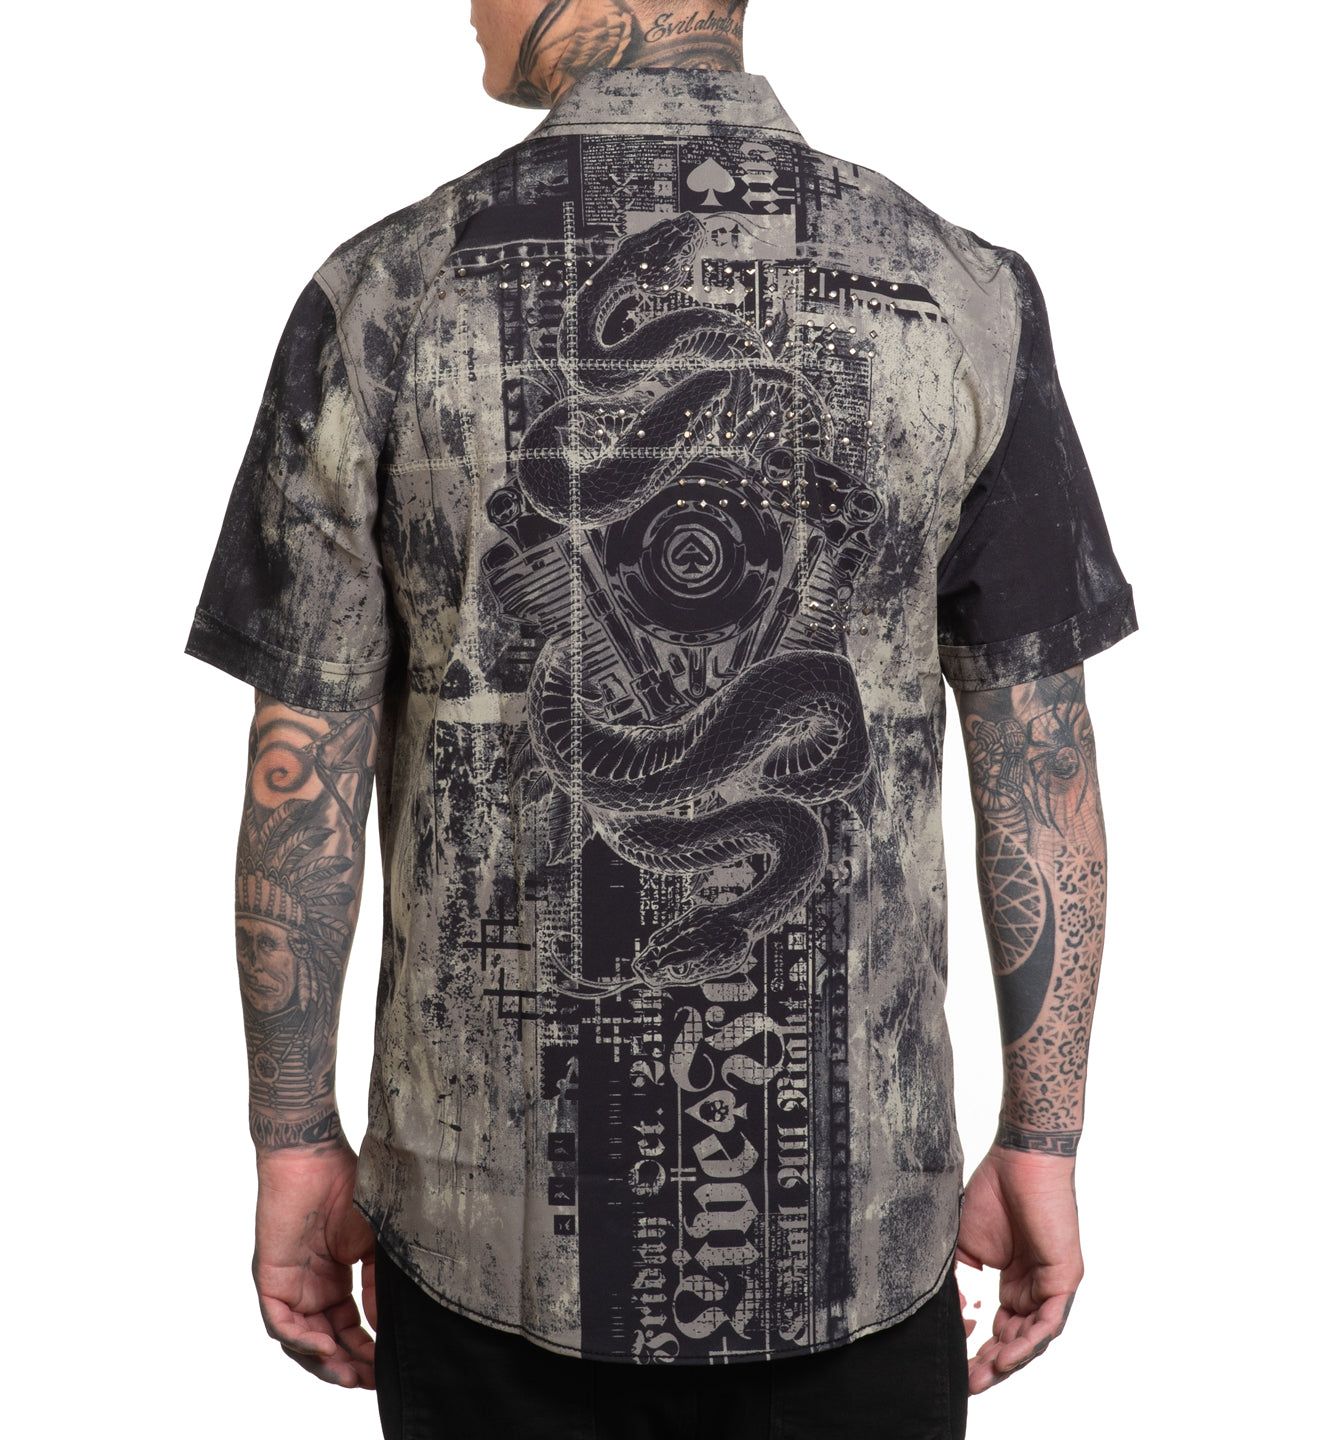 Motorway Chaos - Affliction Clothing